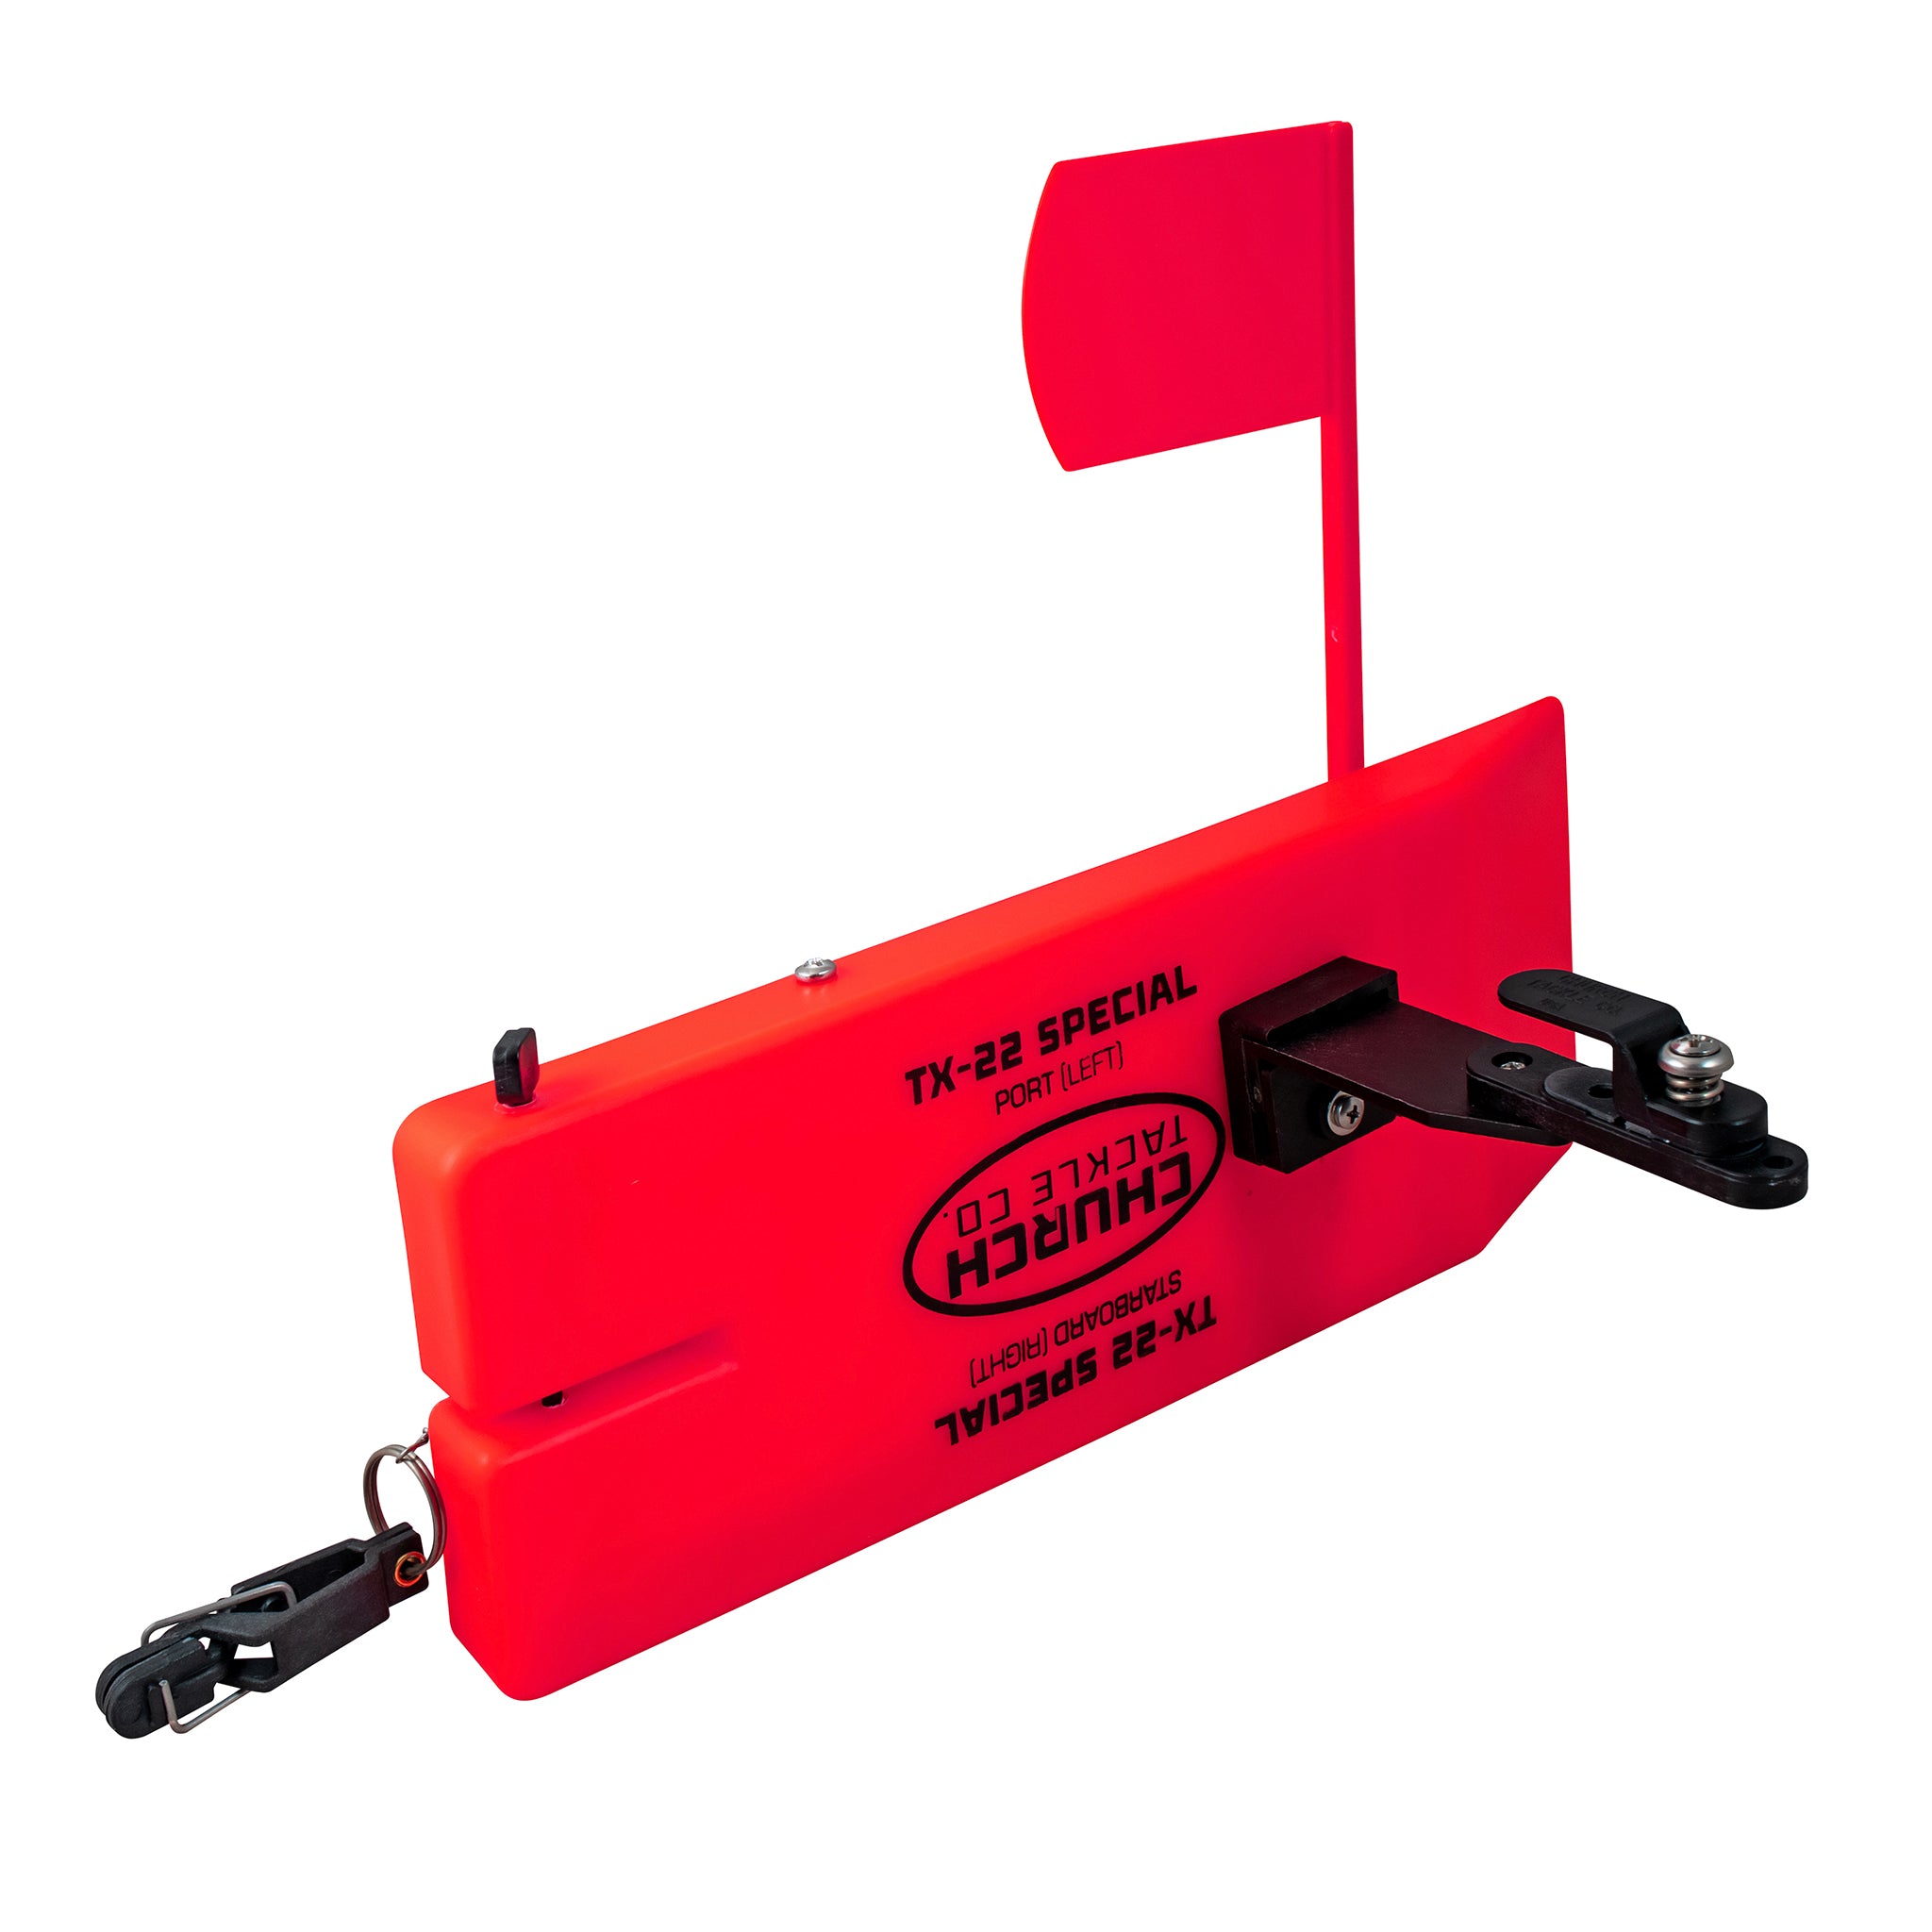 PLANER BOARDS - Church Tackle